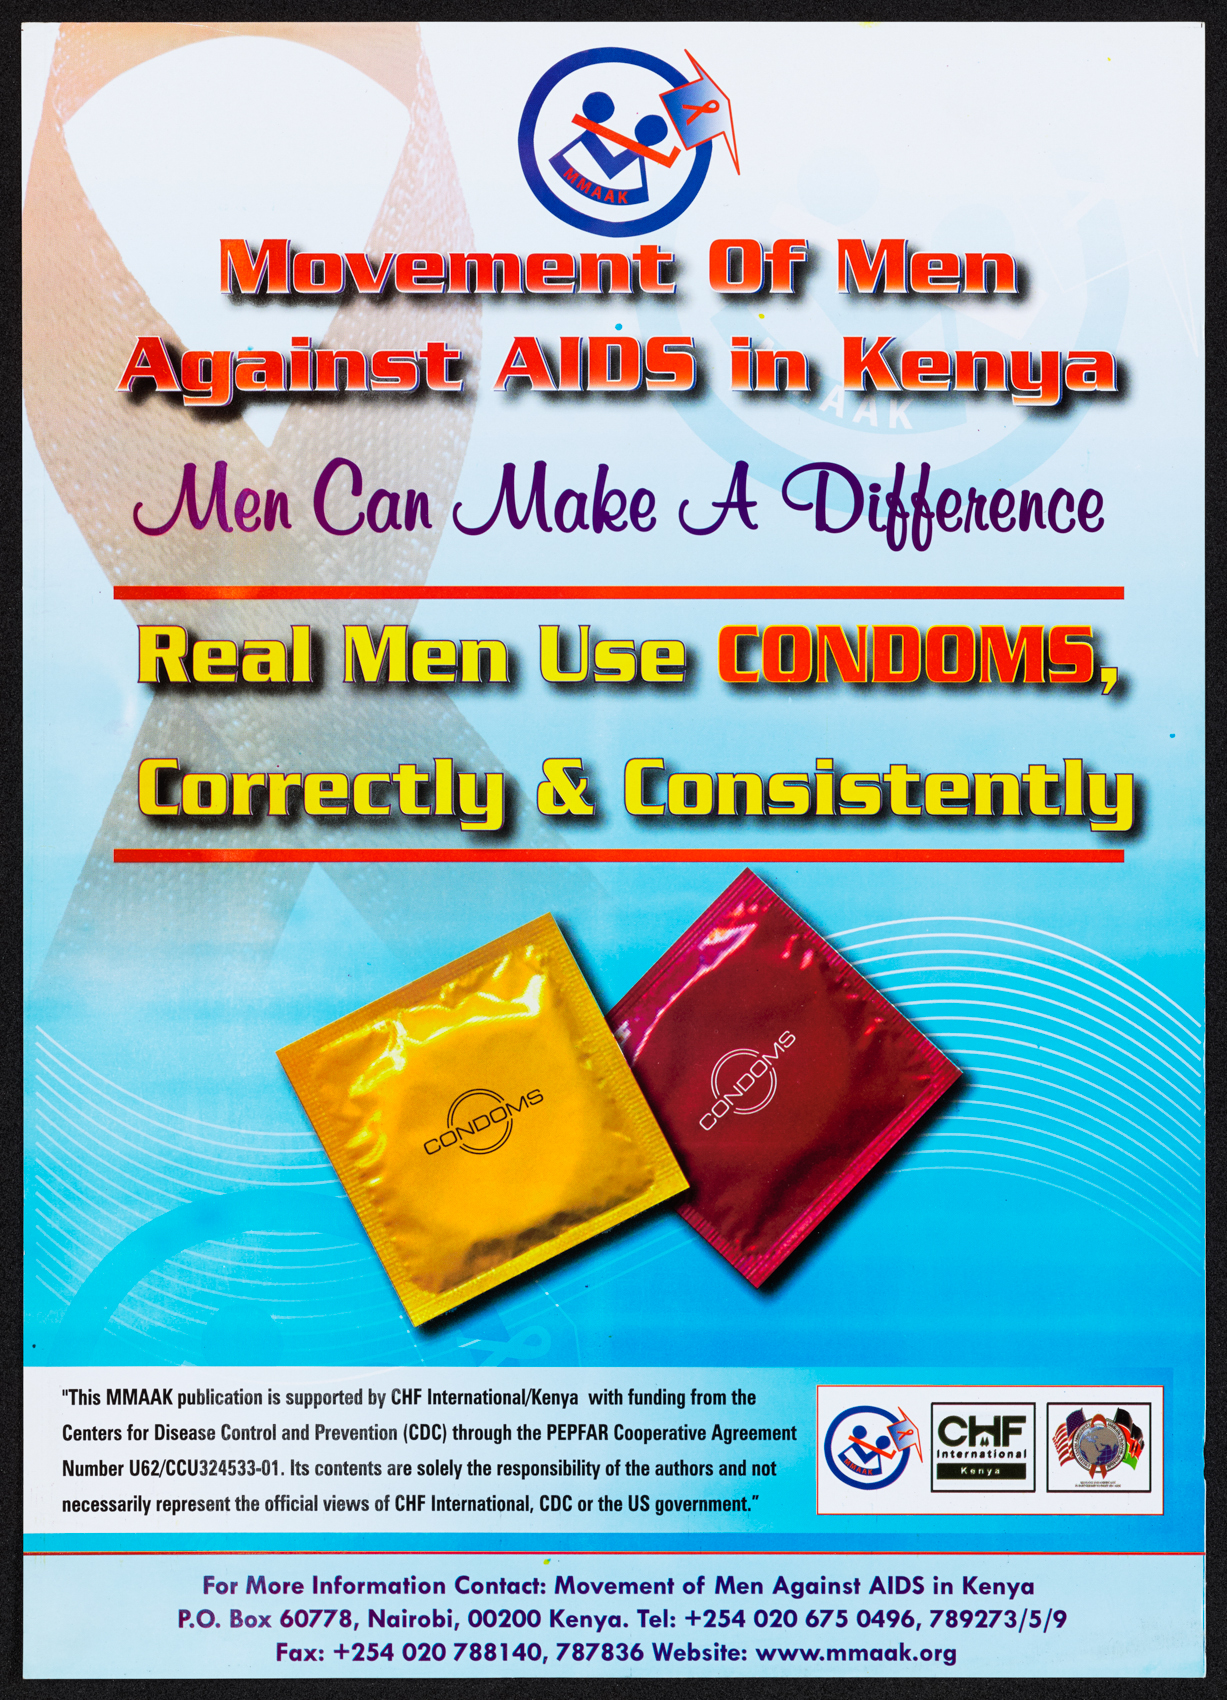 Men can make a difference : real men use condoms, correctly & consistently.